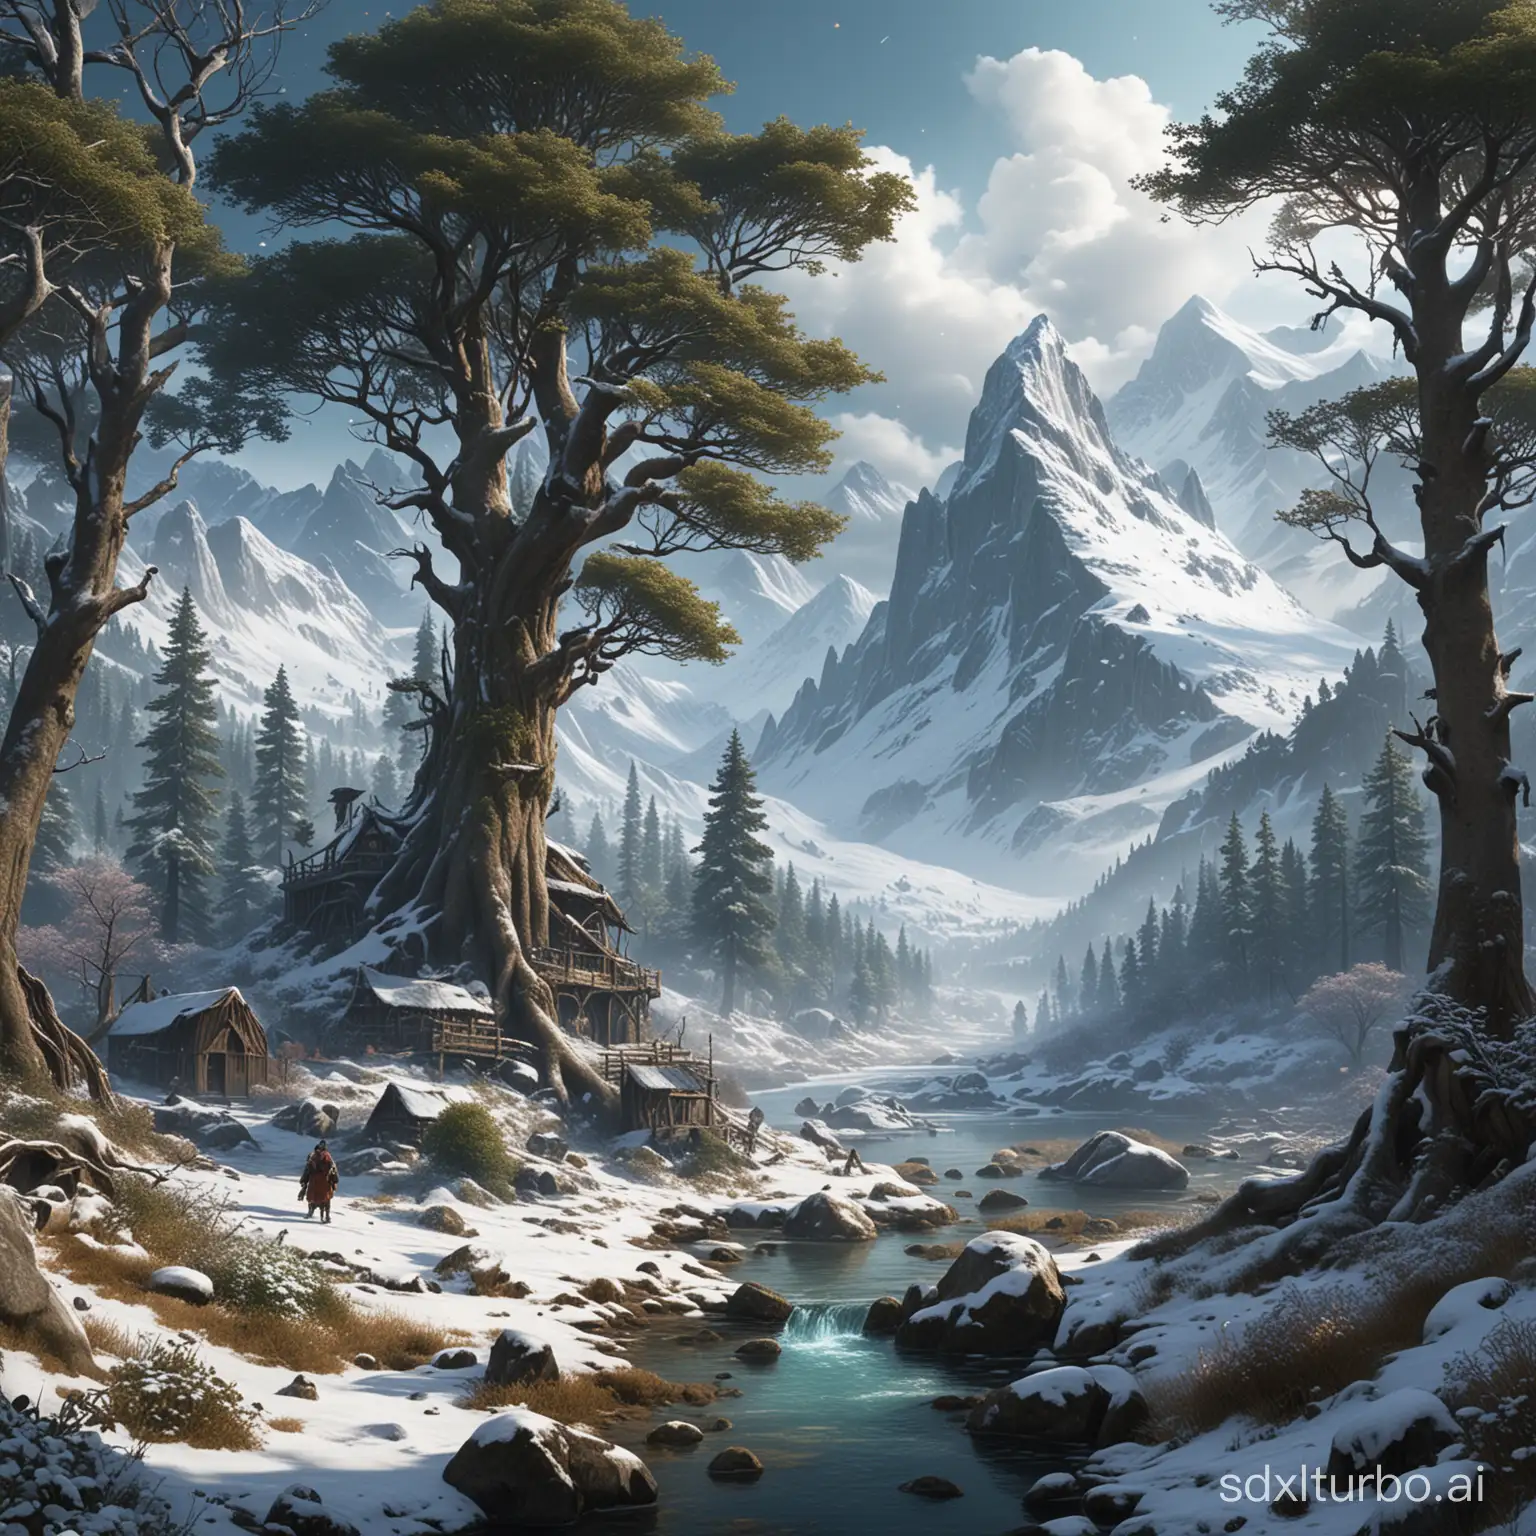 Scenario: A magical and mysterious world full of fantastic creatures and impressive landscapes, such as enchanted forests and snowy mountains.